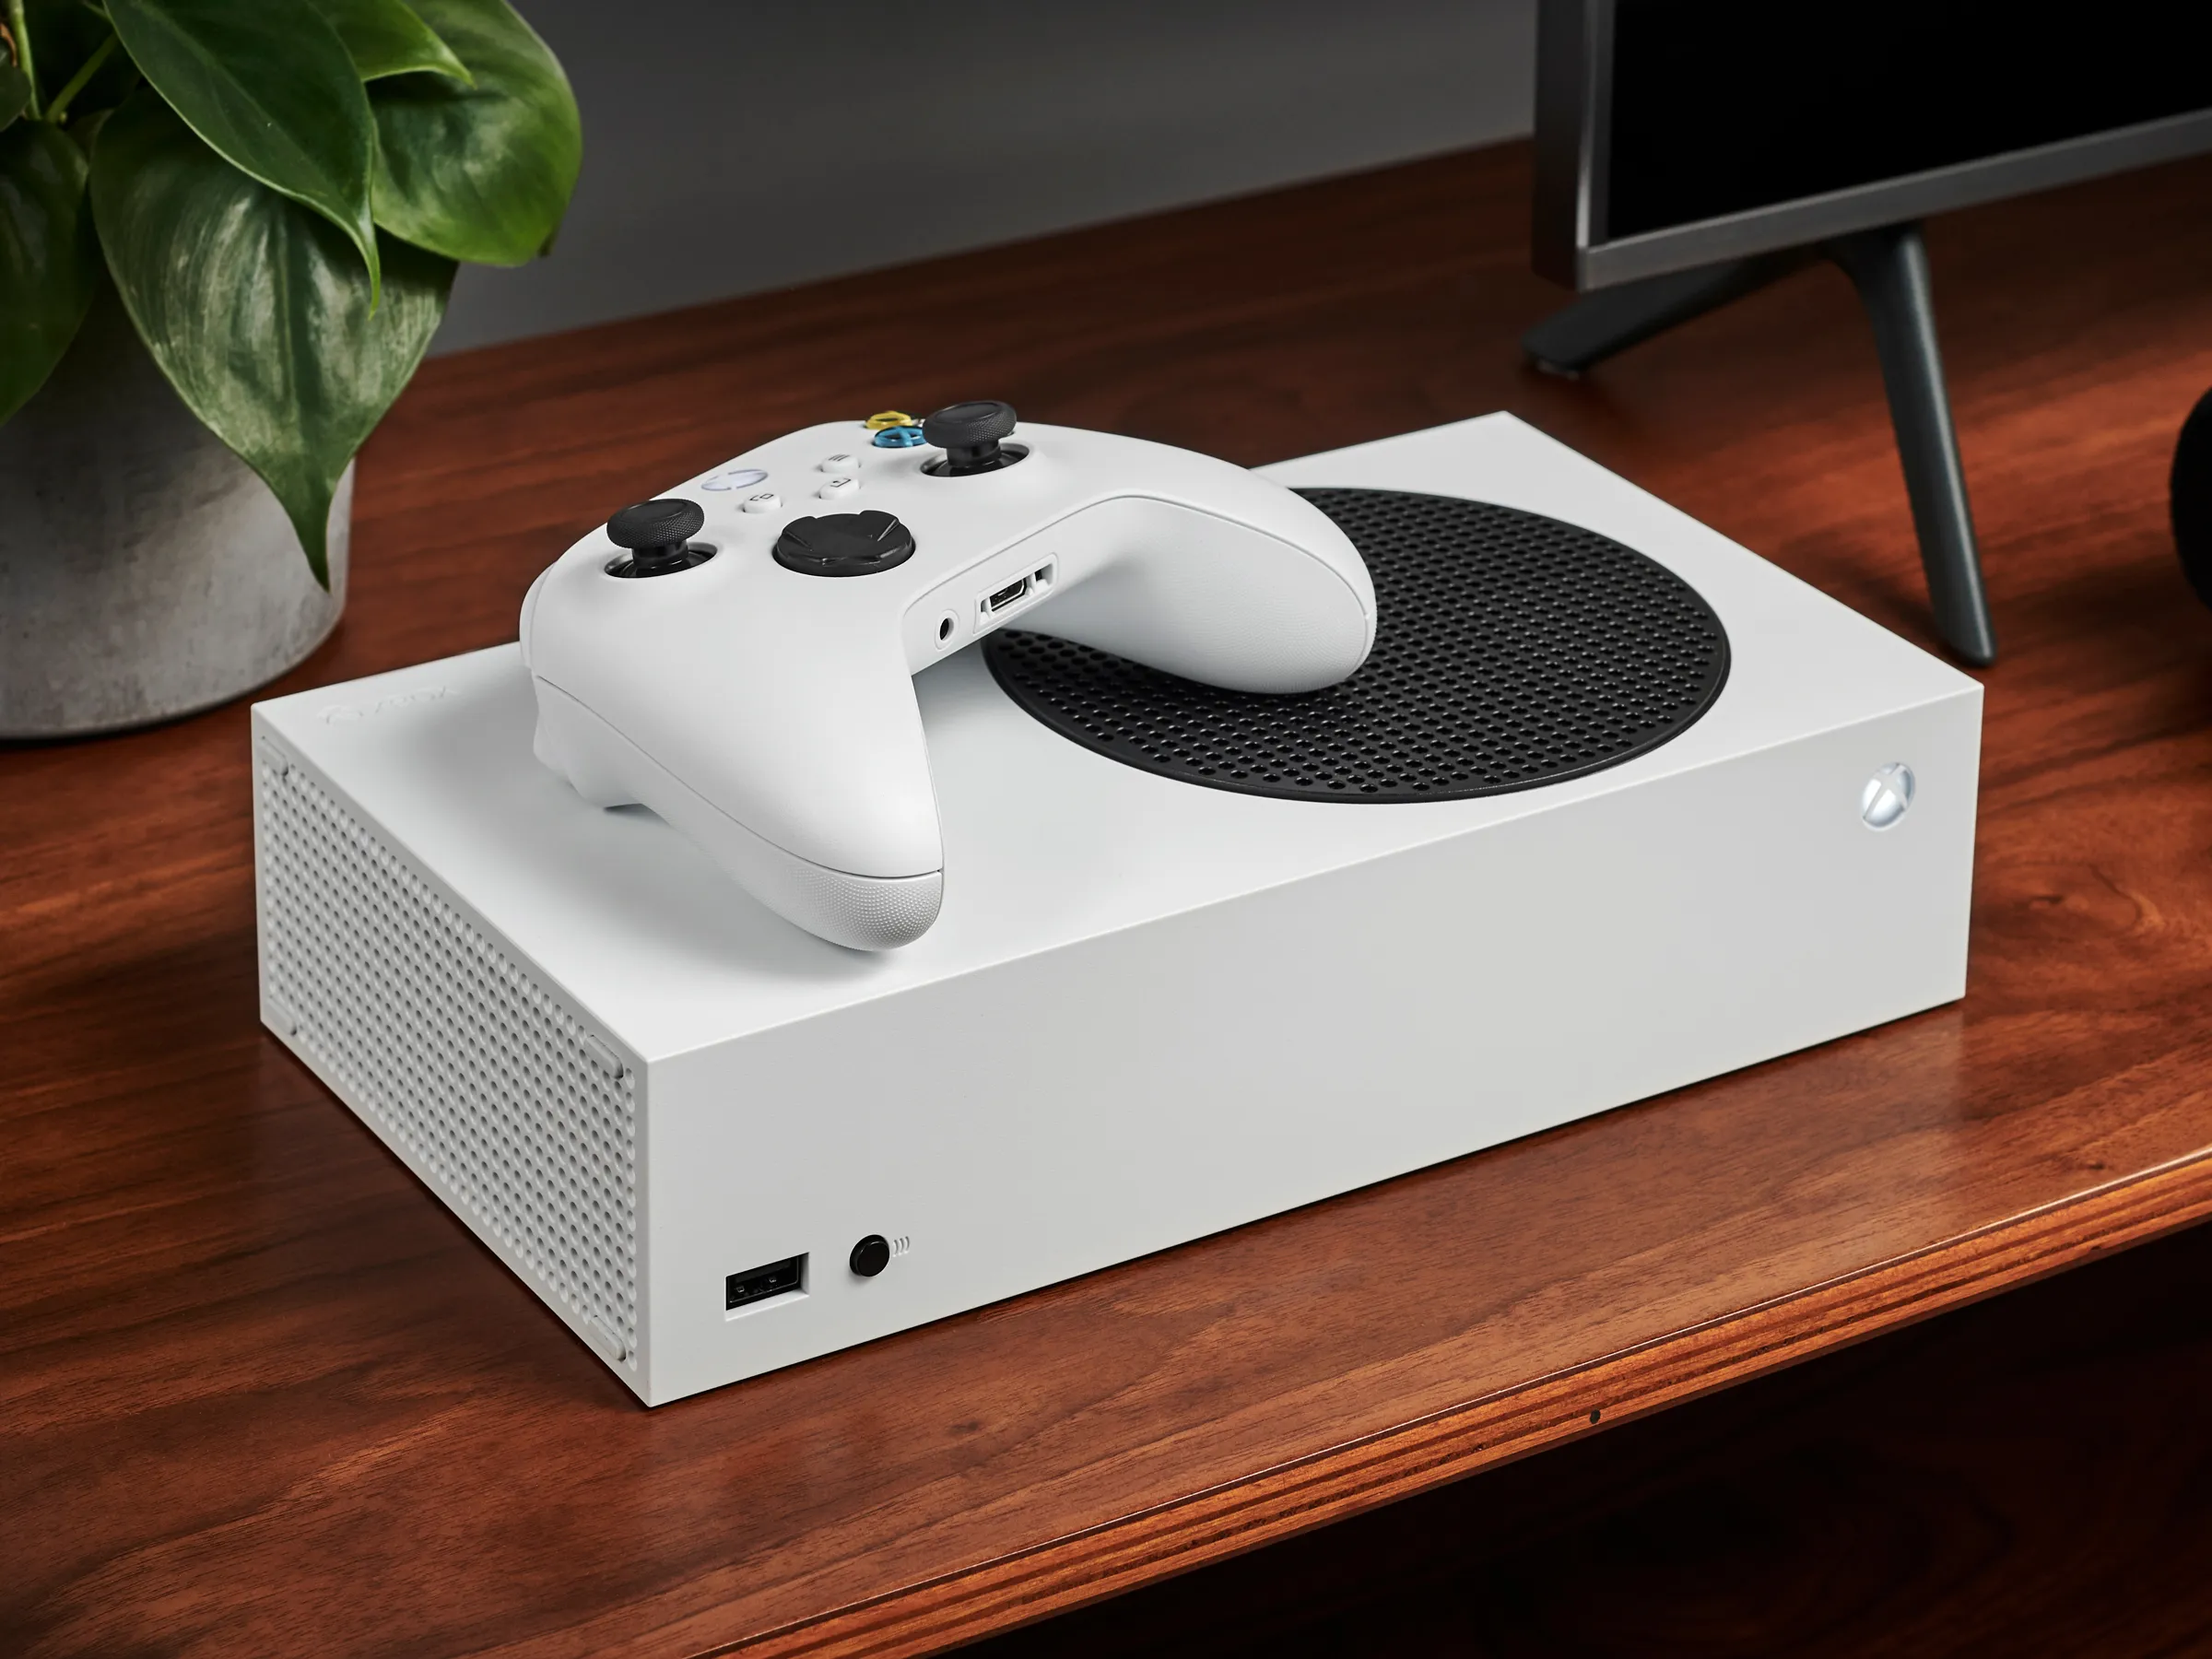 Microsoft Xbox Series S Sees Another Price Hike in India; All We Know